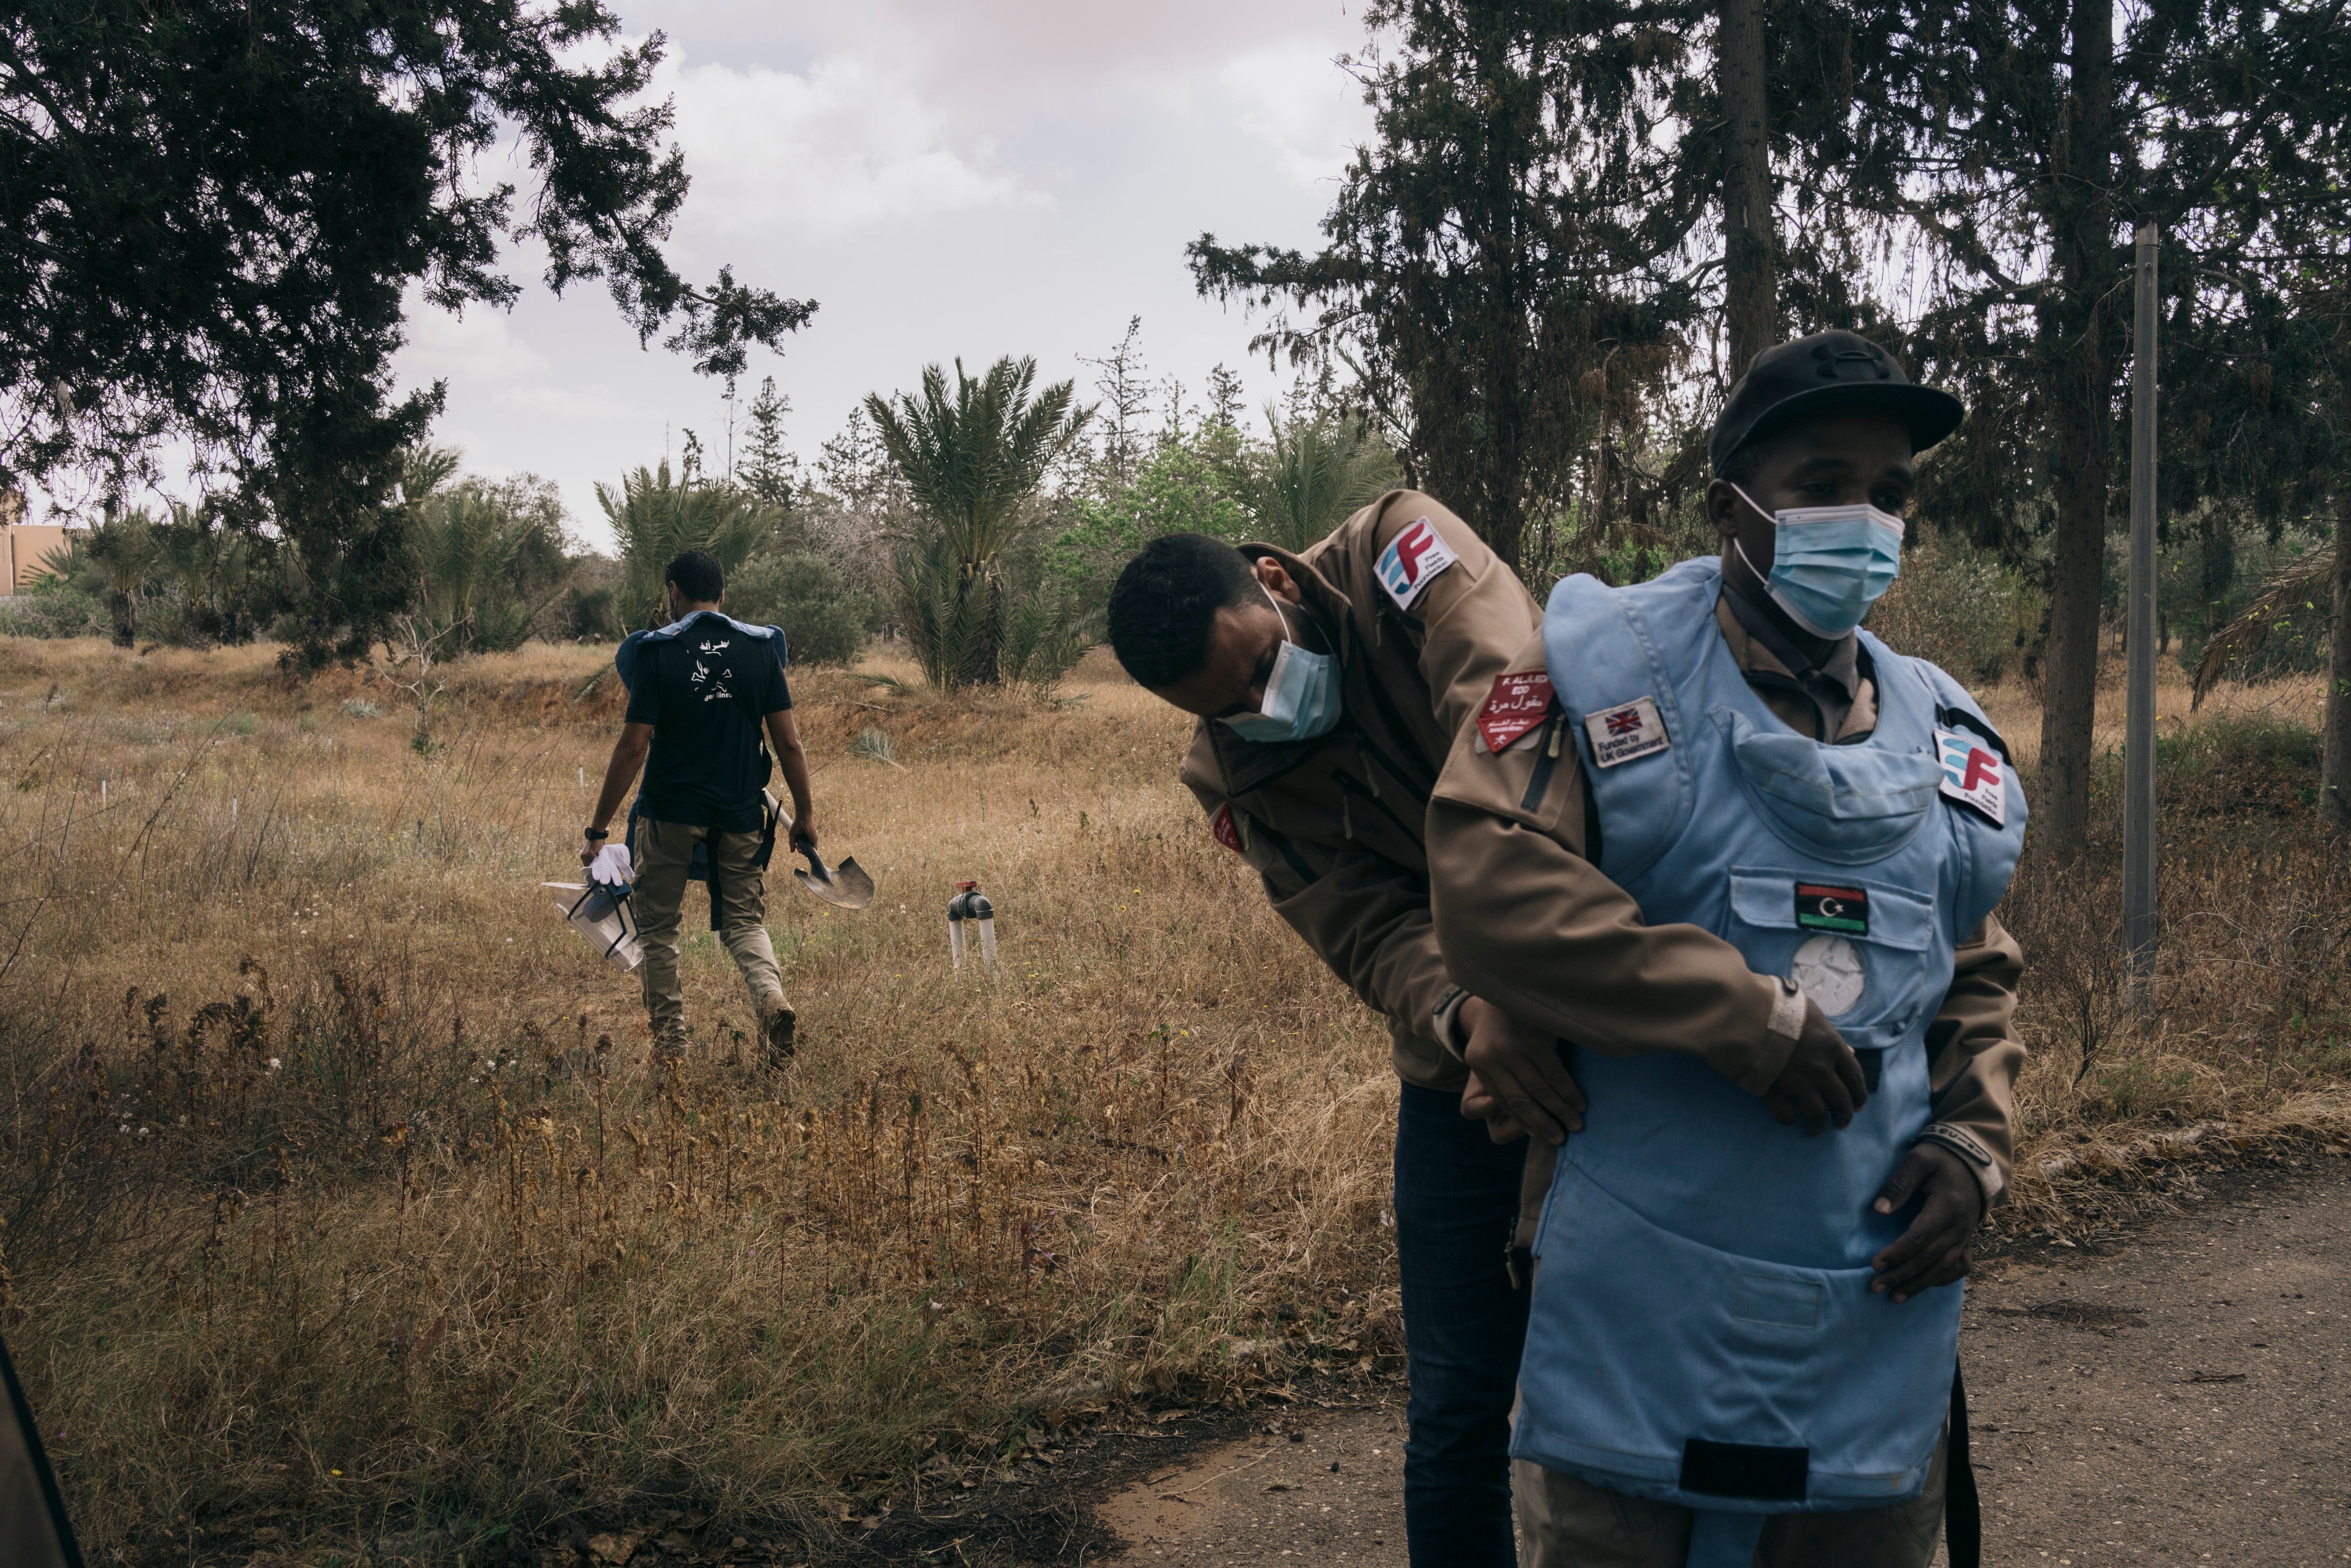 Mohammed Zlateni, left, and his colleagues at the Free Fields Foundation, prepare to collect an unexploded mortar round from a field in the suburbs of Tripoli